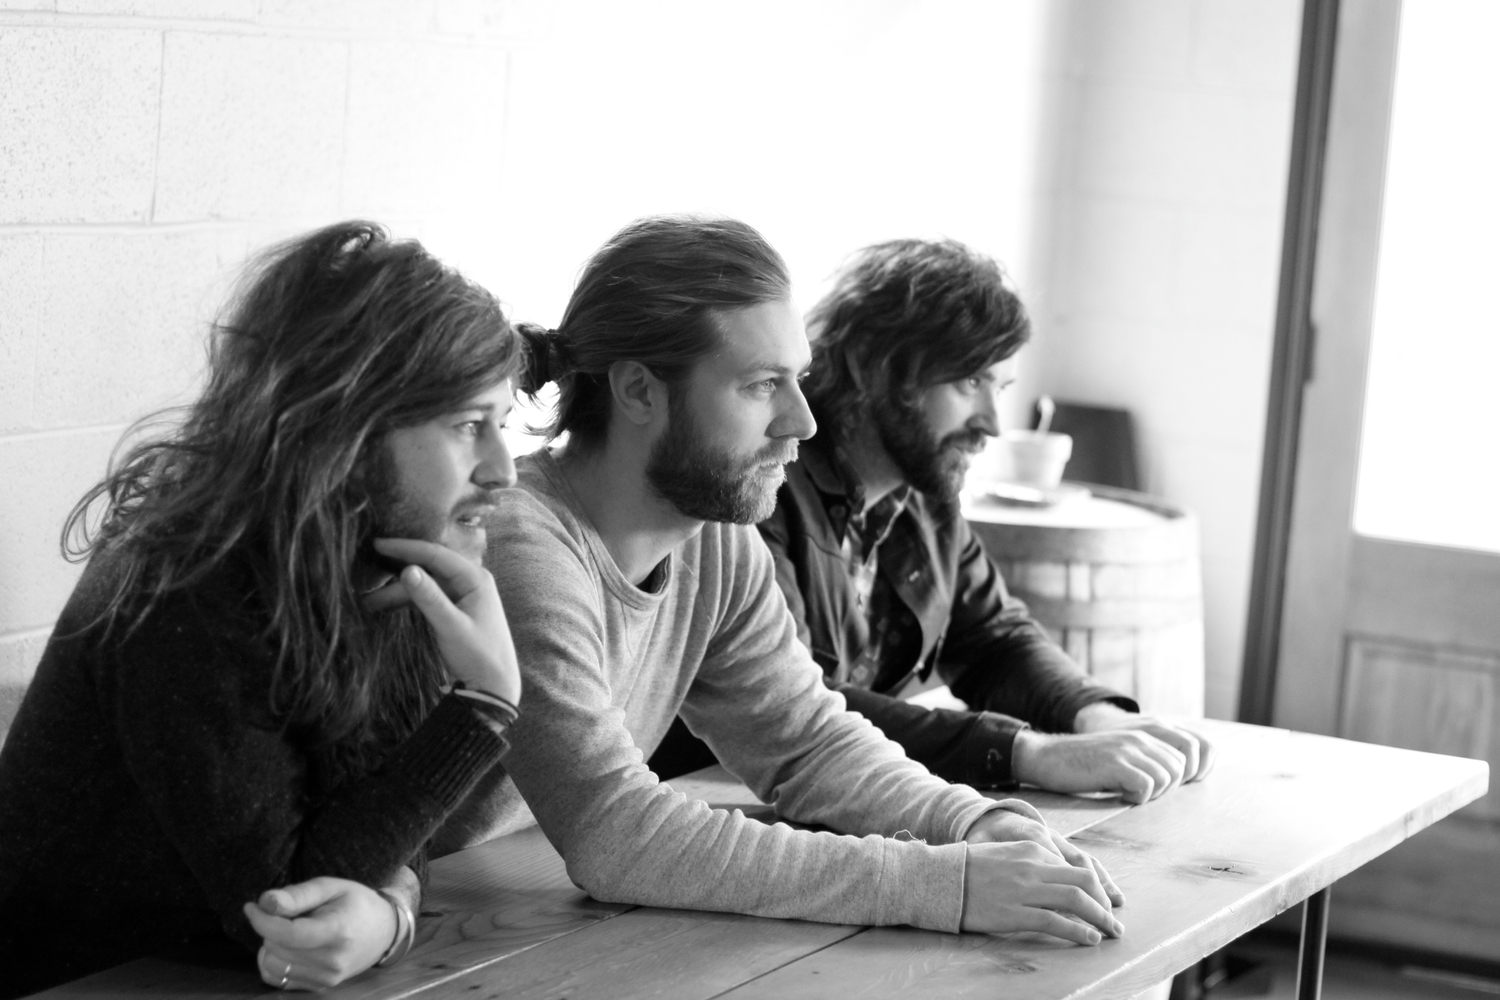 Other Lives announce new ‘Rituals’ album, stream ‘Reconfiguration’